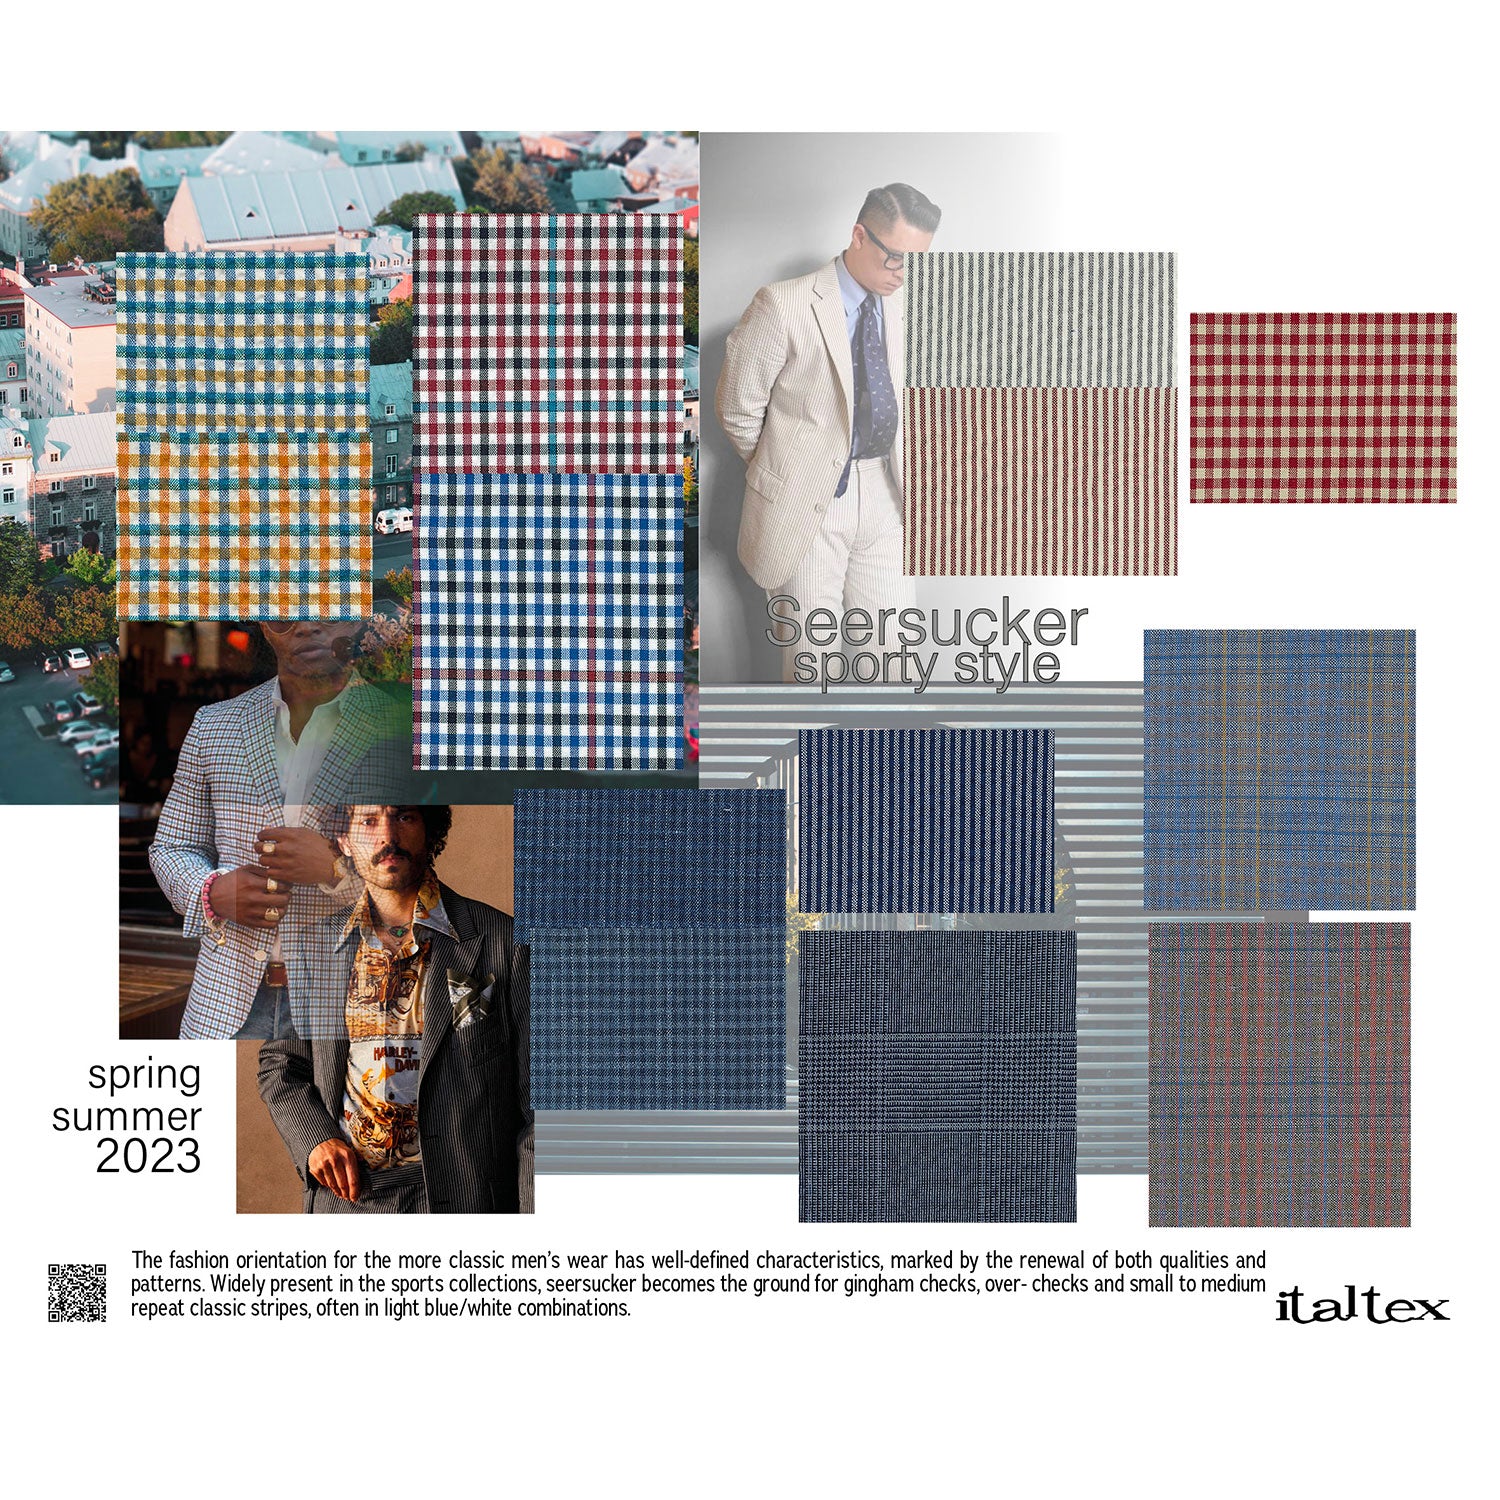 The fashion orientation for the more classic men’s wear has well-defined characteristics, marked by the renewal of both qualities and patterns. Widely present in the sports collections, seersucker becomes the ground for gingham checks, over-checks and small to medium repeat classic stripes, often in light blue/white combinations